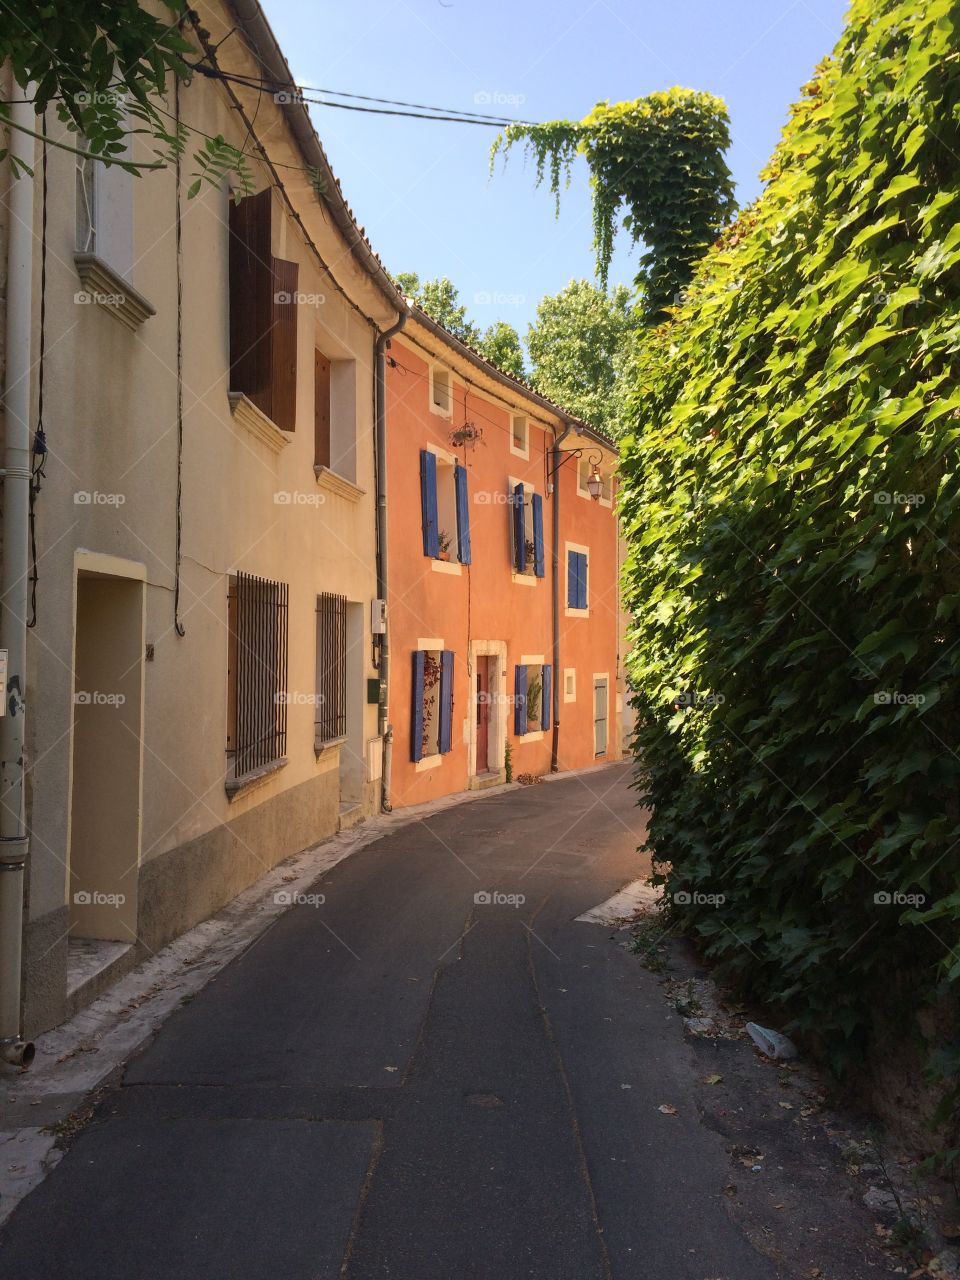 Alleyway in Pernes-les-Fontaines, France. 